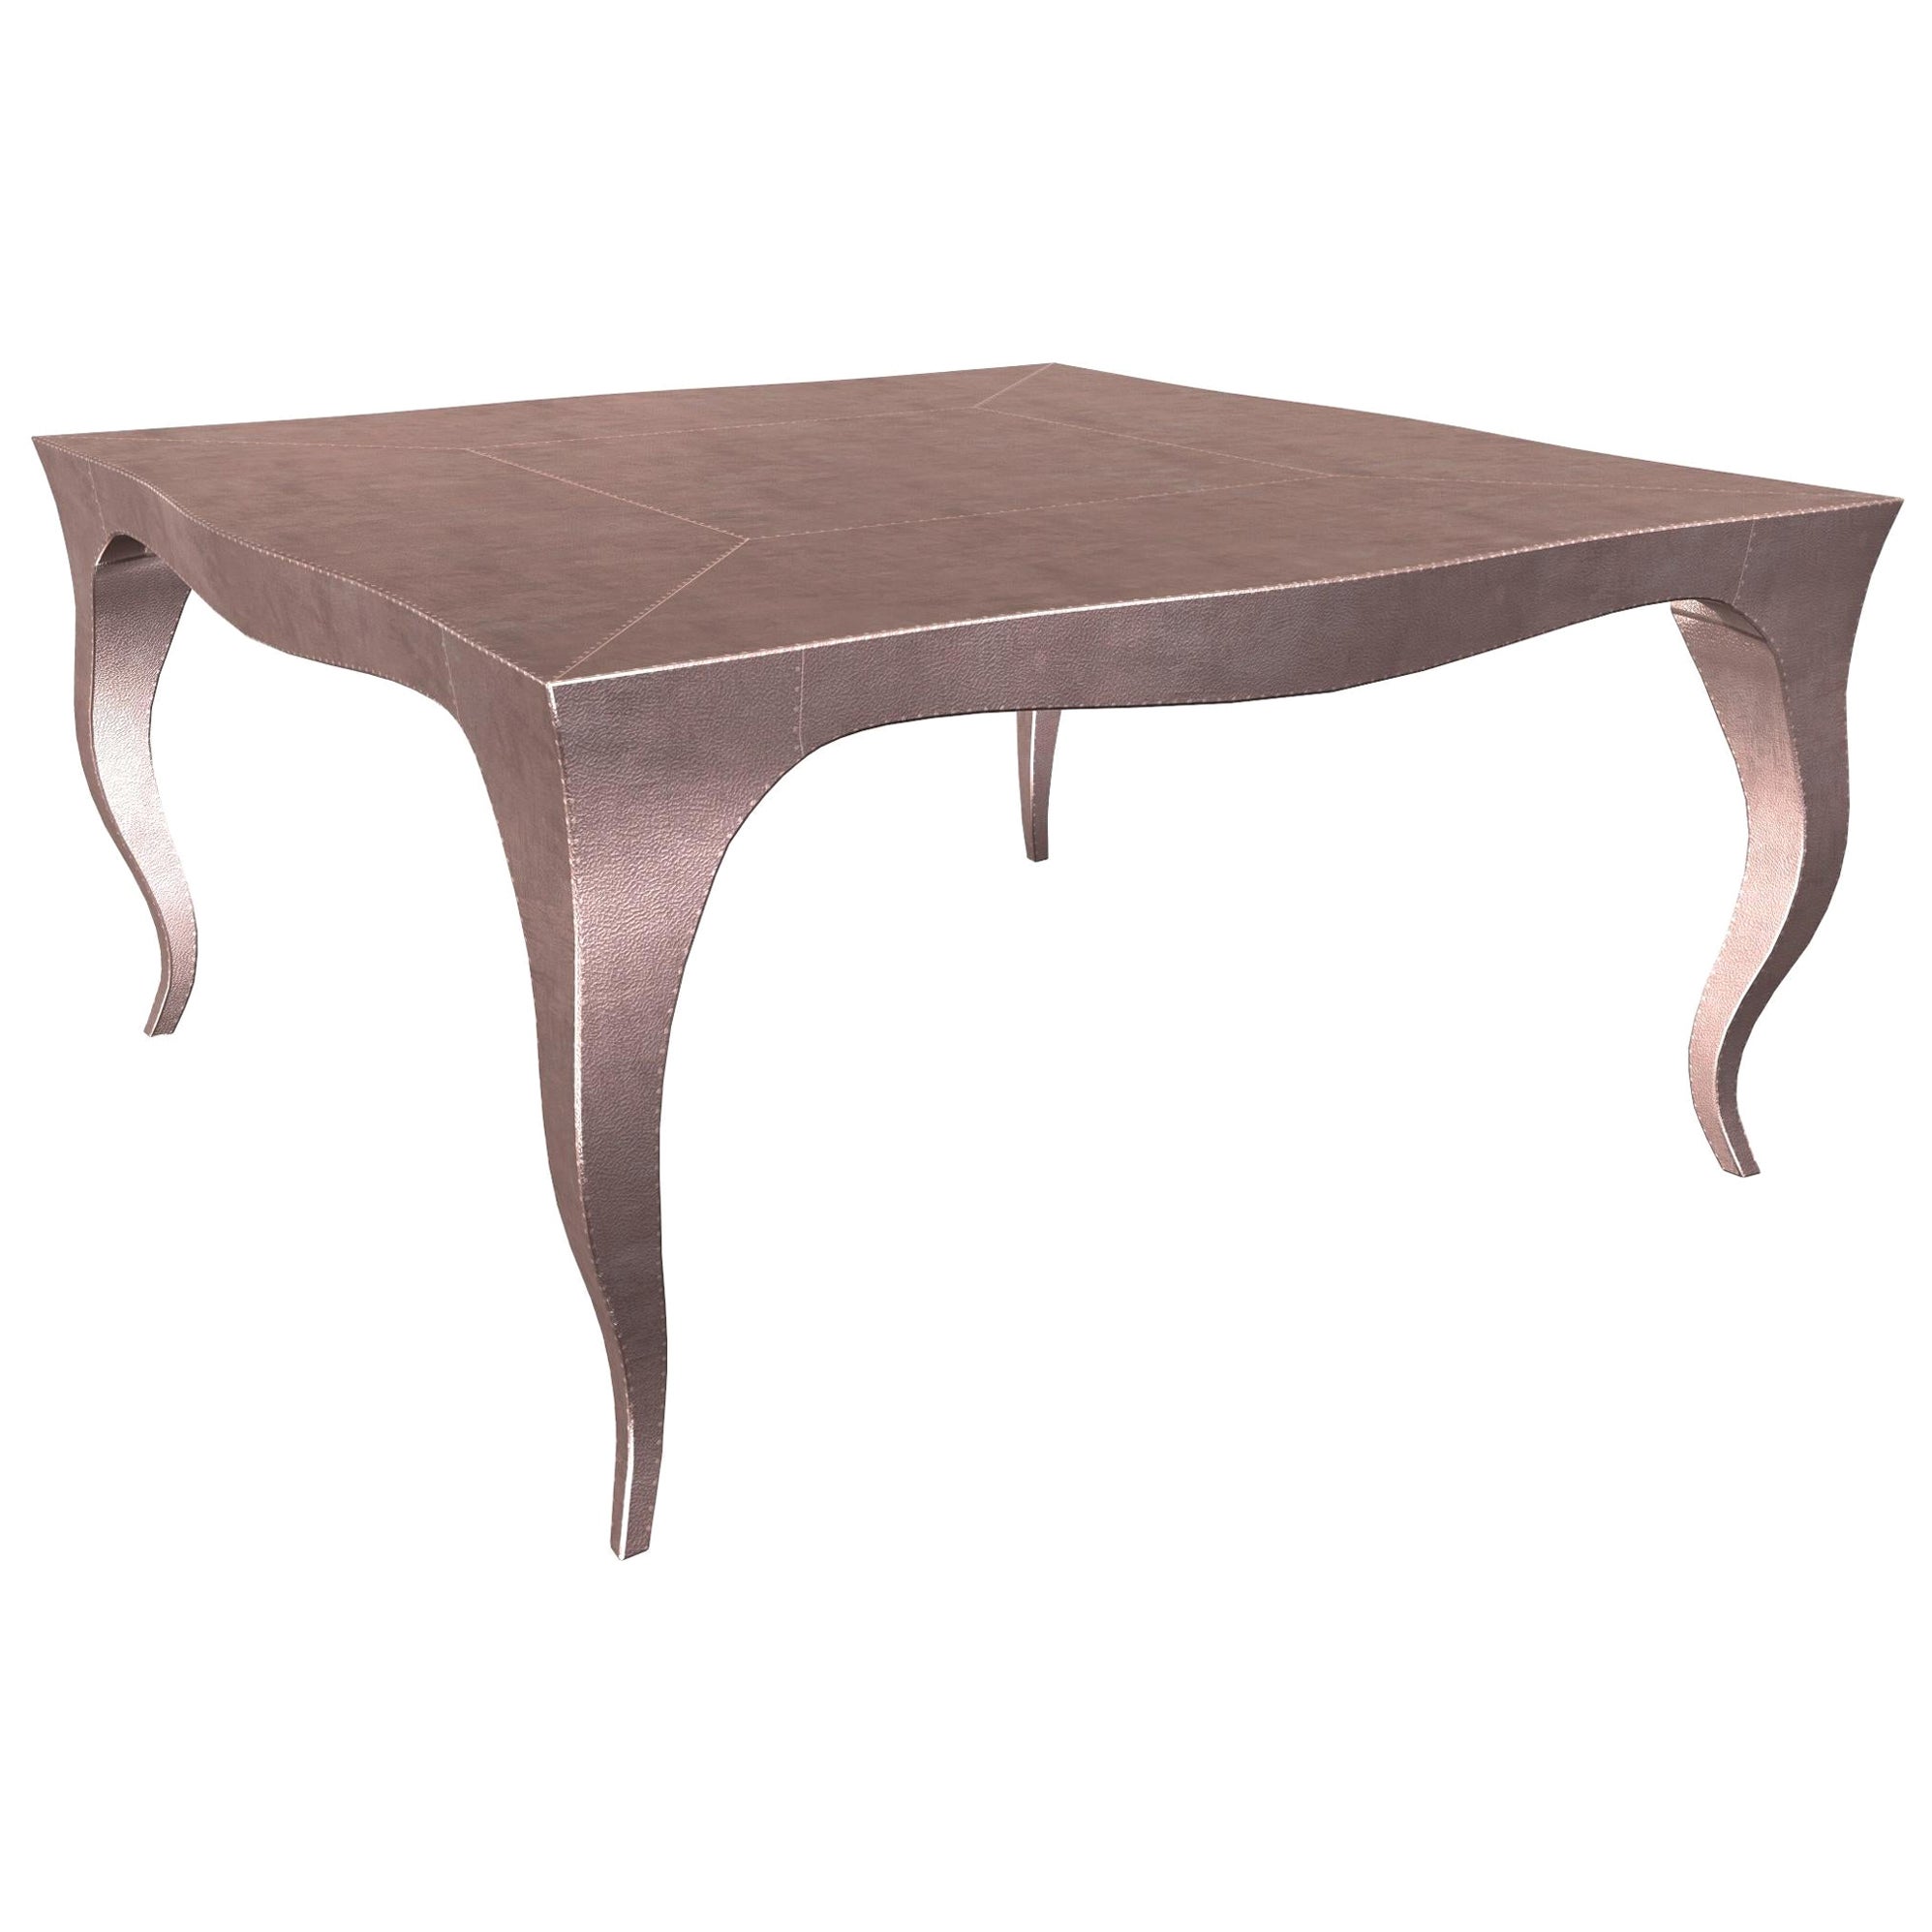 Louise Art Deco Nesting Tables Fine Hammered Copper by Paul 18.5x18.5x10 inch 